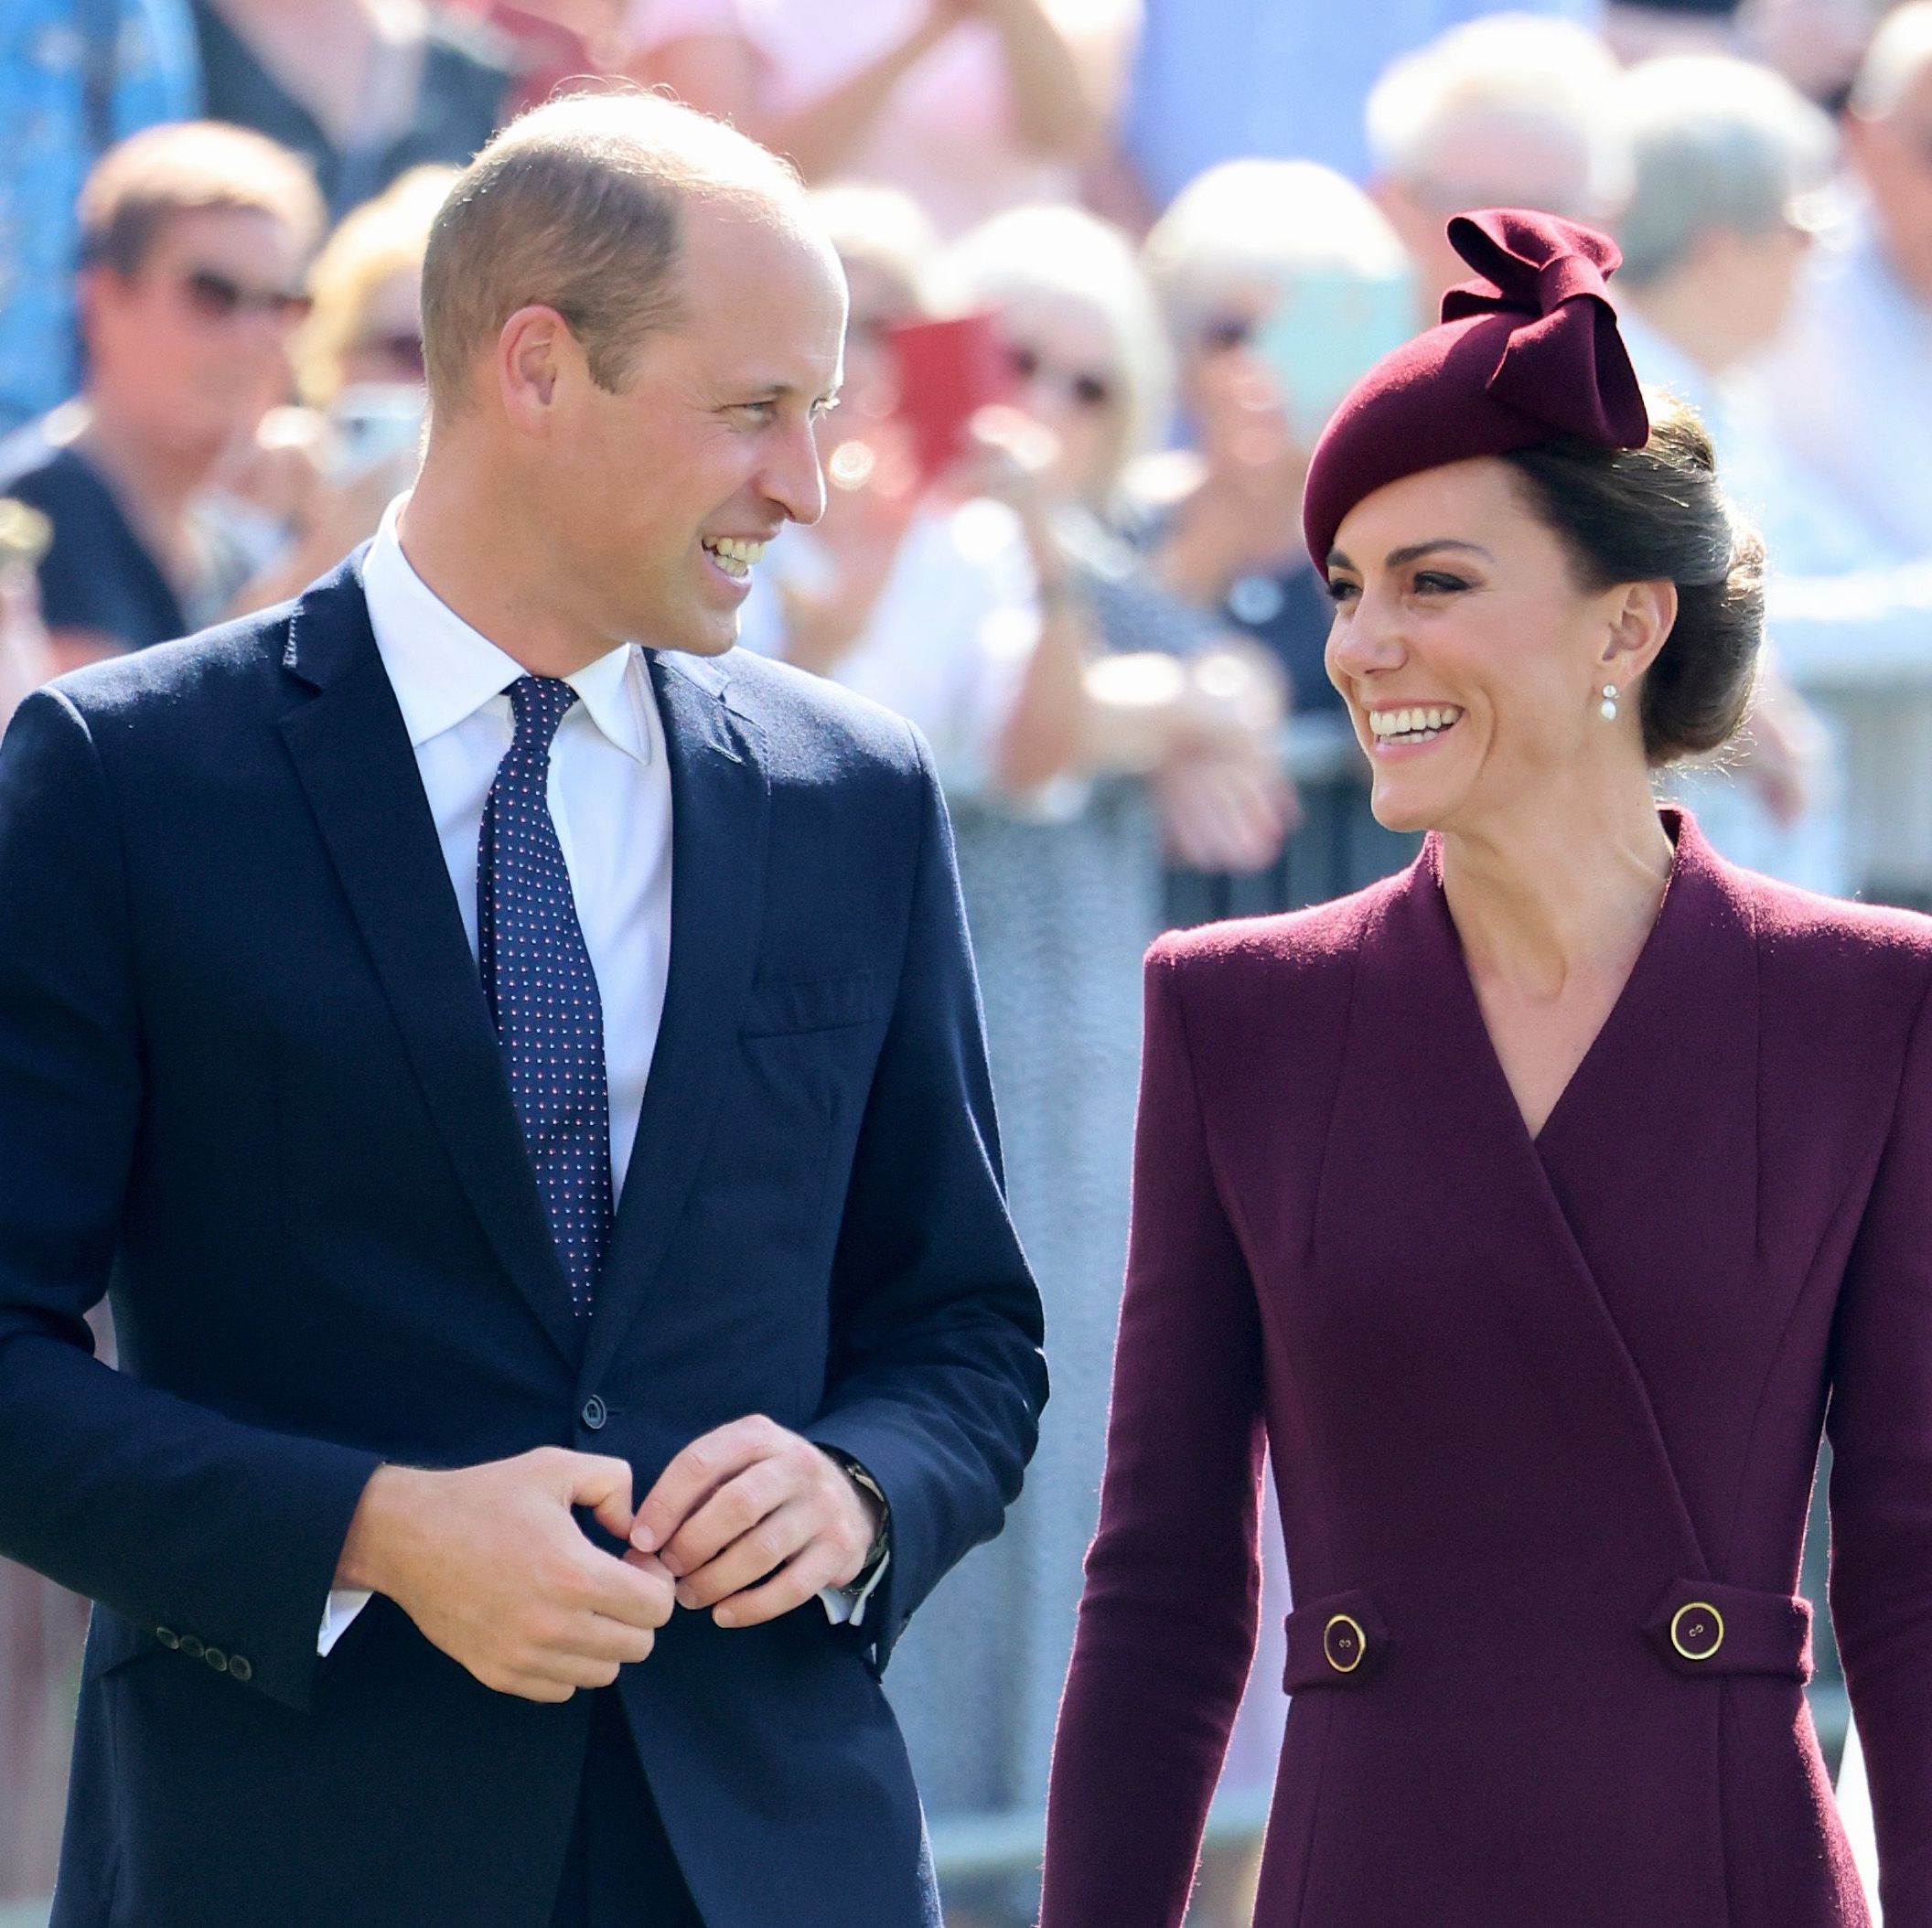 Prince William Is Postponing Royal Duties to Support Kate Middleton Amid Hospitalization